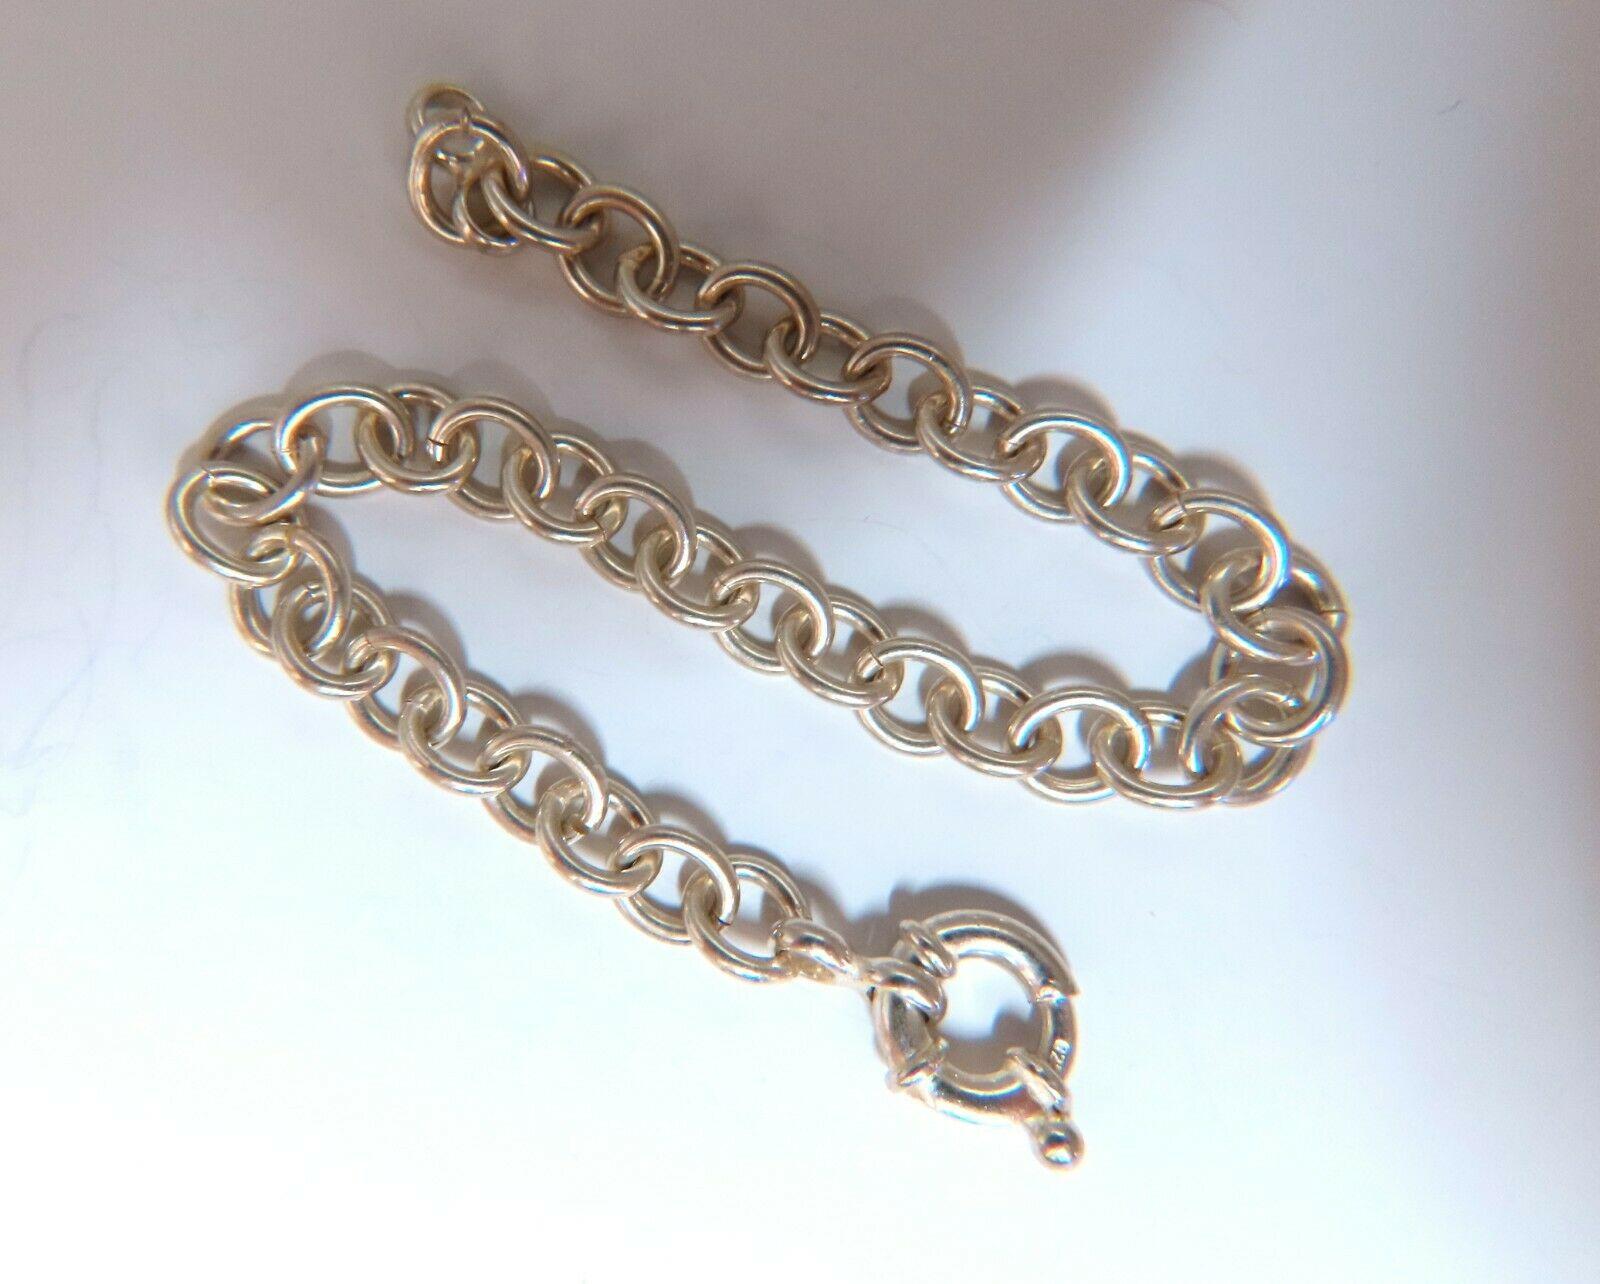 Sterling Silver Toggle Link Bracelet

8.75 Inch

7mm links

Sterling silver 17 grams

Free Insured overnight shipping.

All Items come with a Free White ribbon gift box.